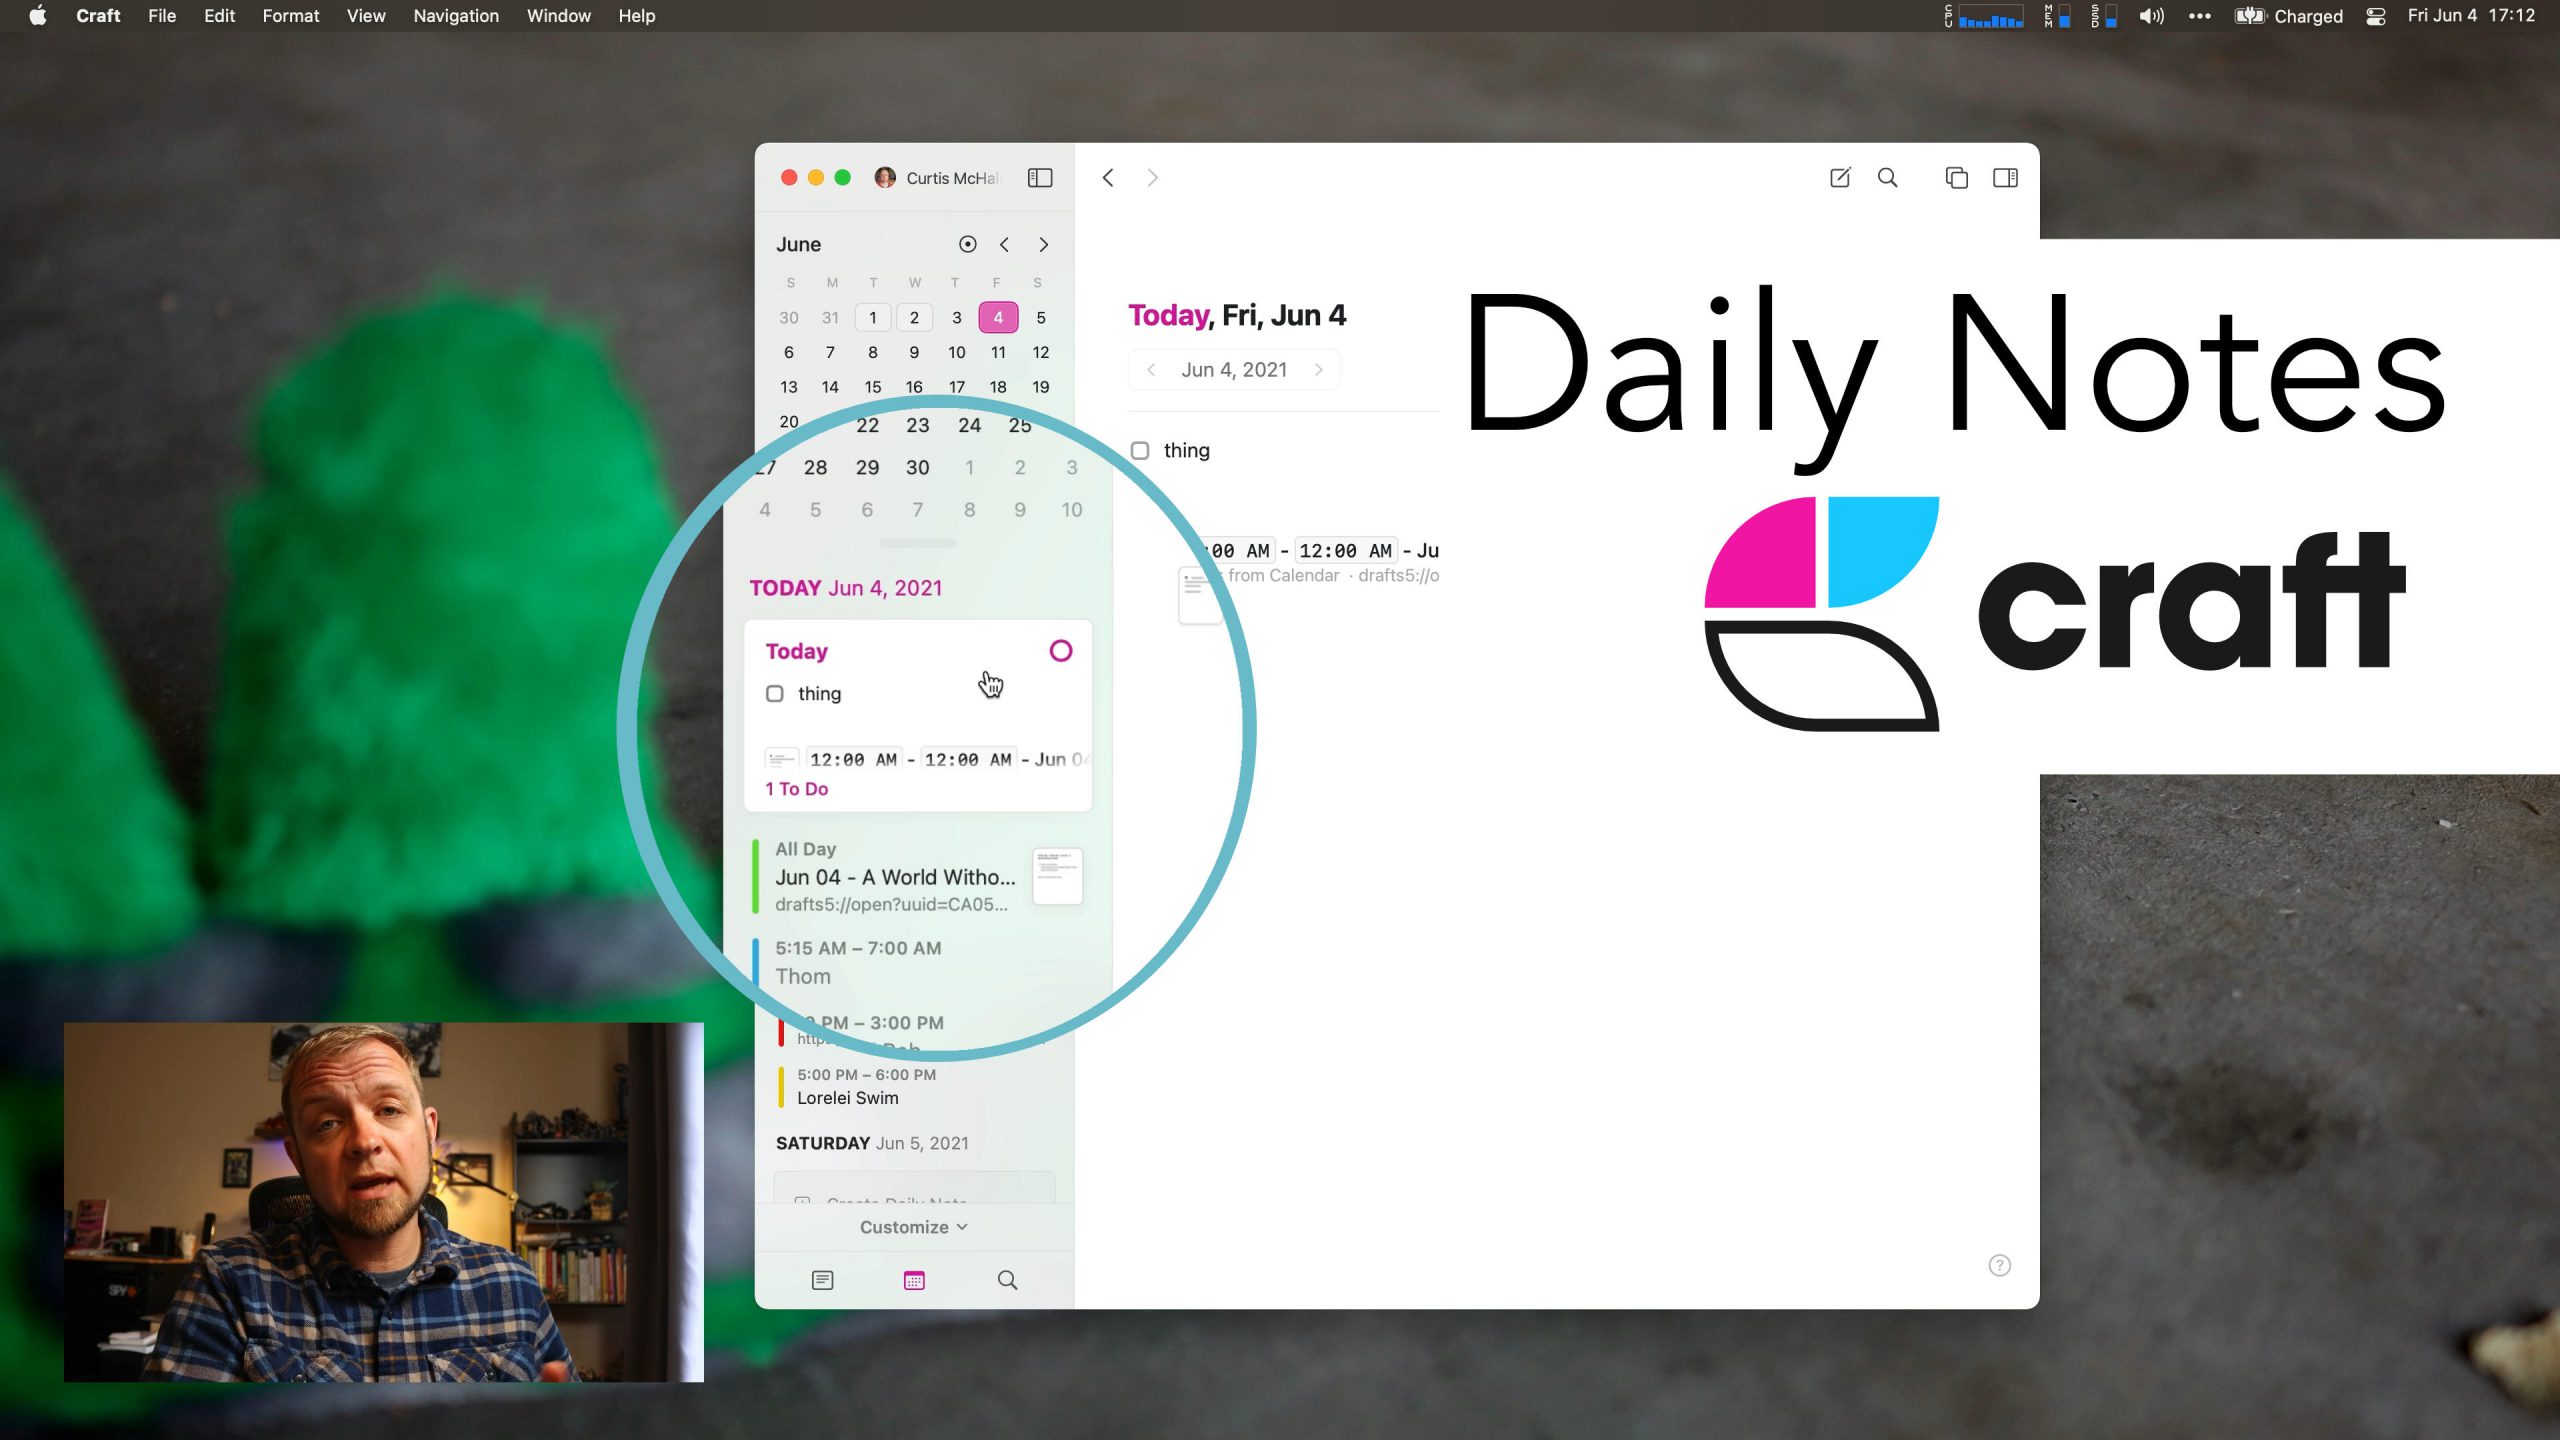 NEW – Daily Notes in Craft